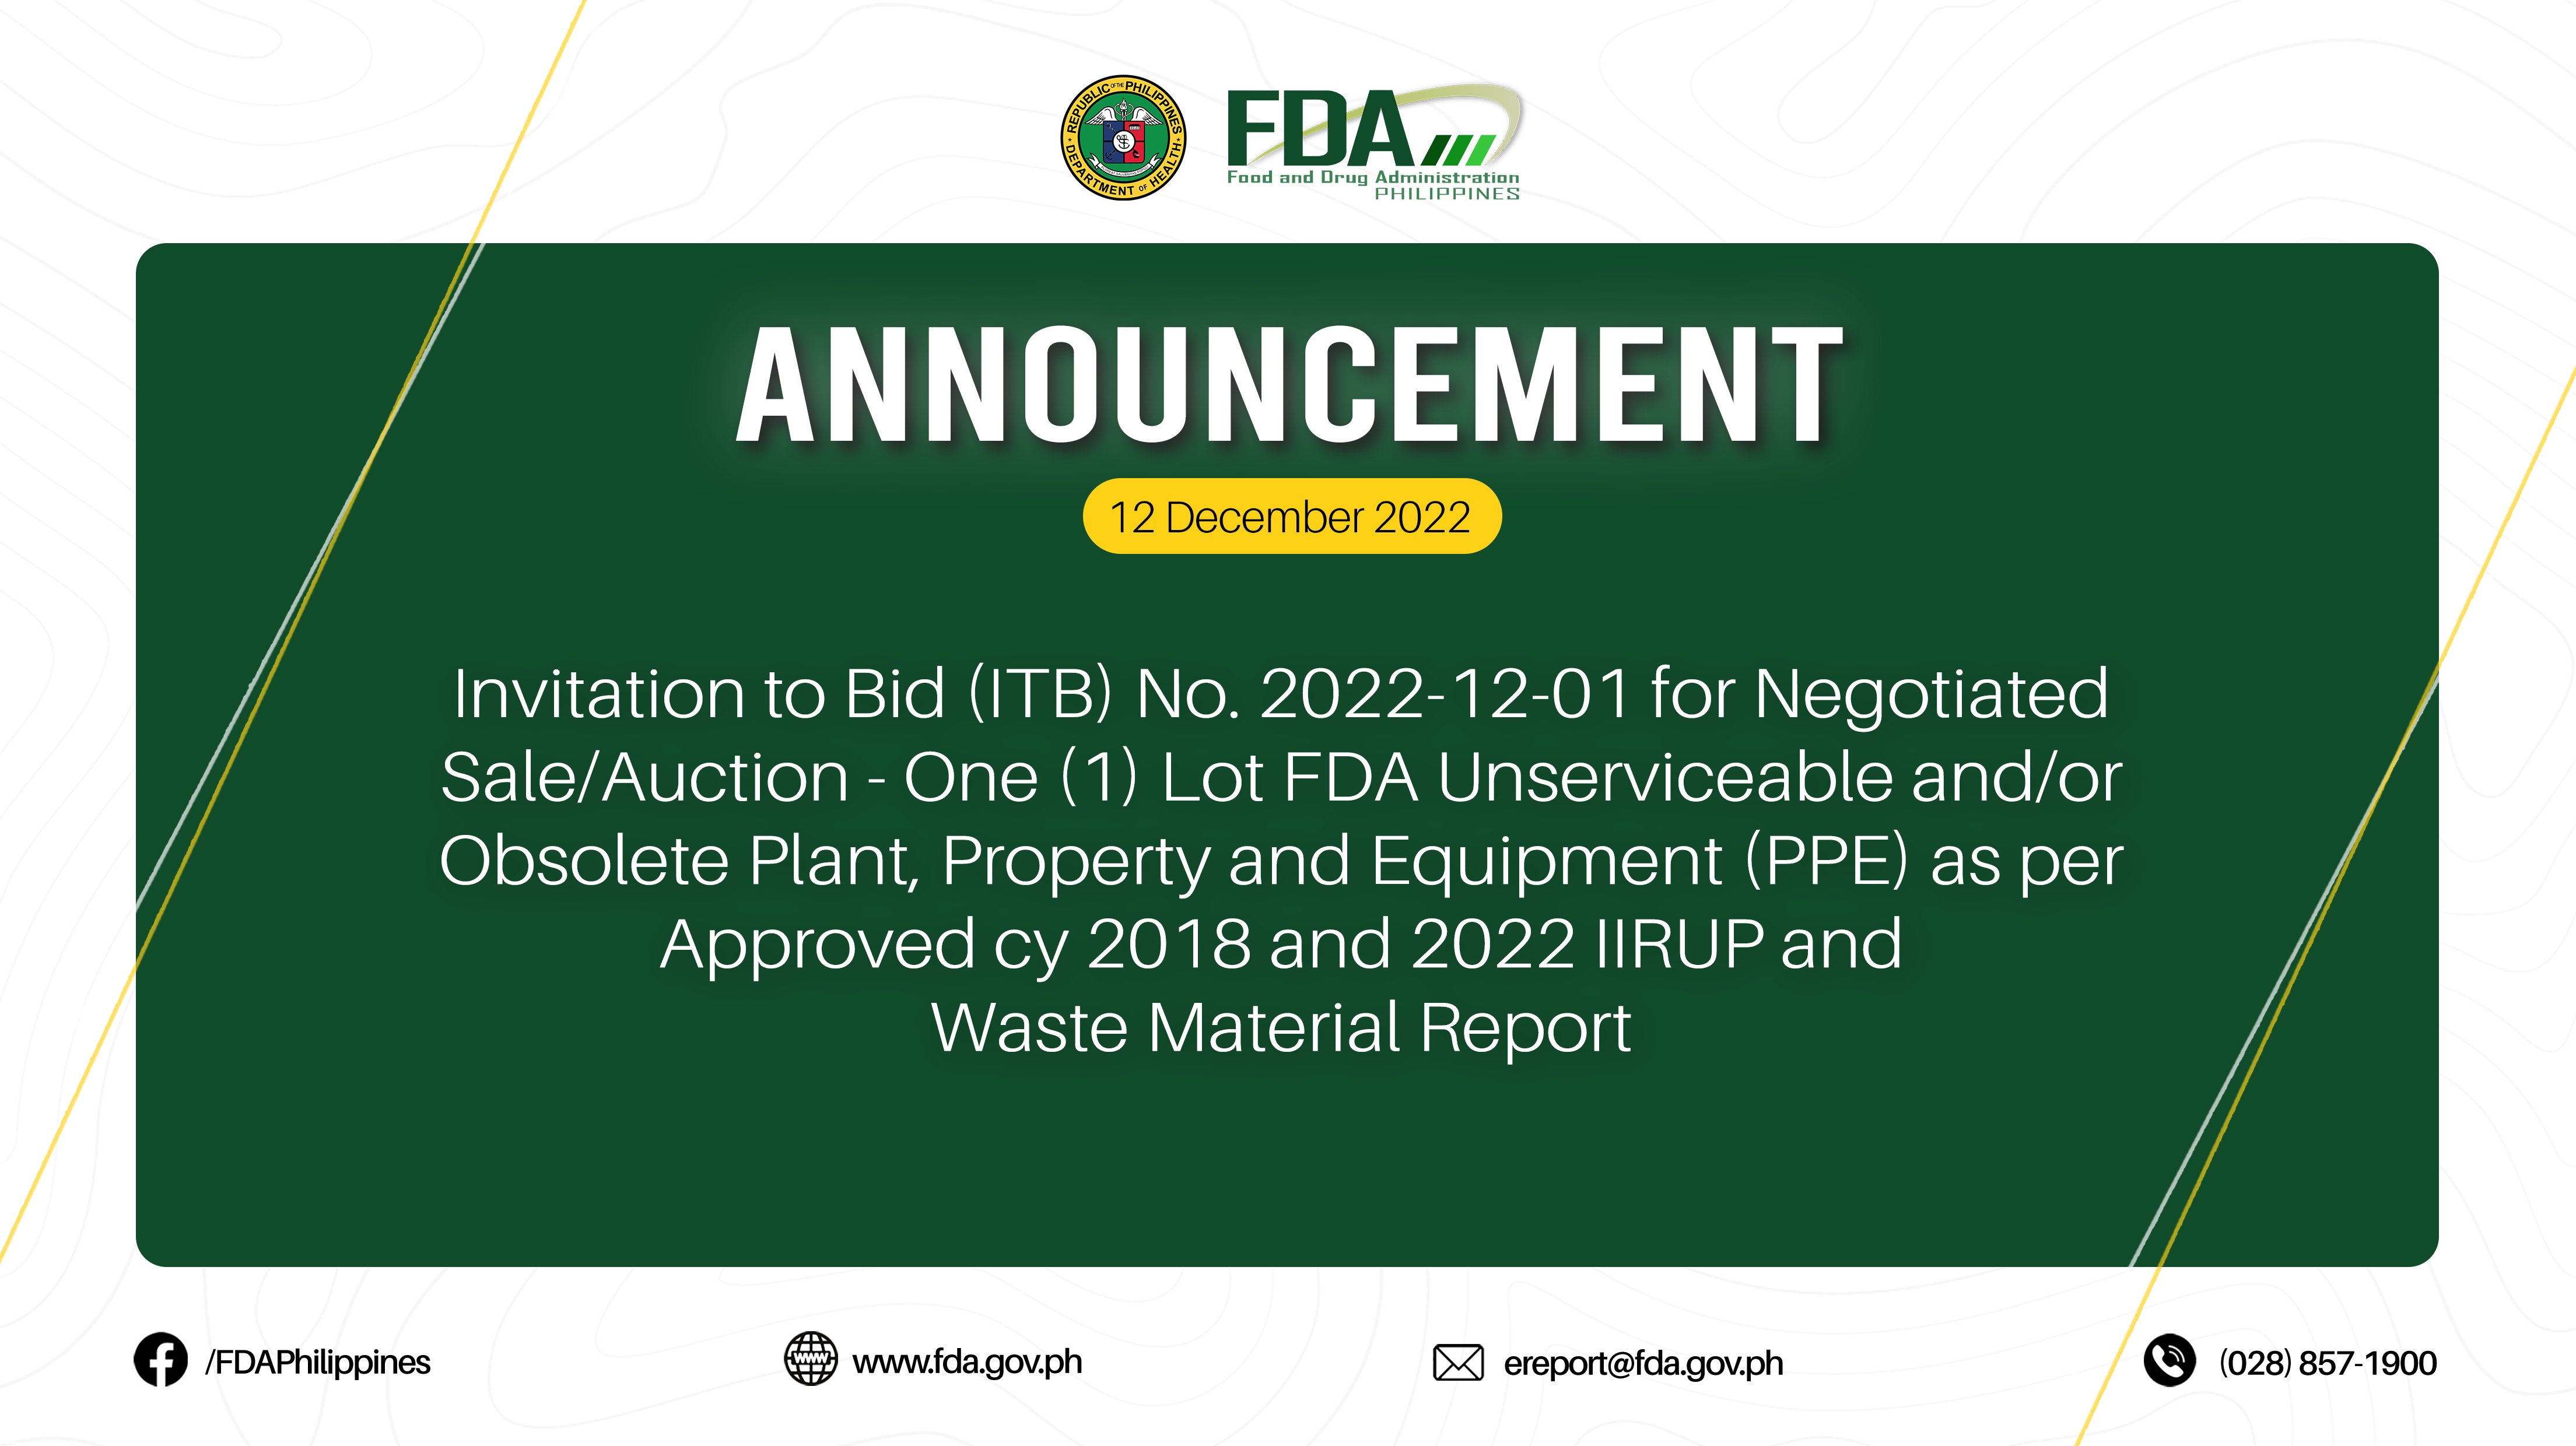 Announcement || Invitation to Bid (ITB) No. 2022-12-01 for Negotiated Sale/Auction – One (1) Lot FDA Unserviceable and/or Obsolete Plant, Property and Equipment (PPE) as per Approved cy 2018 and 2022 IIRUP and Waste Material Report